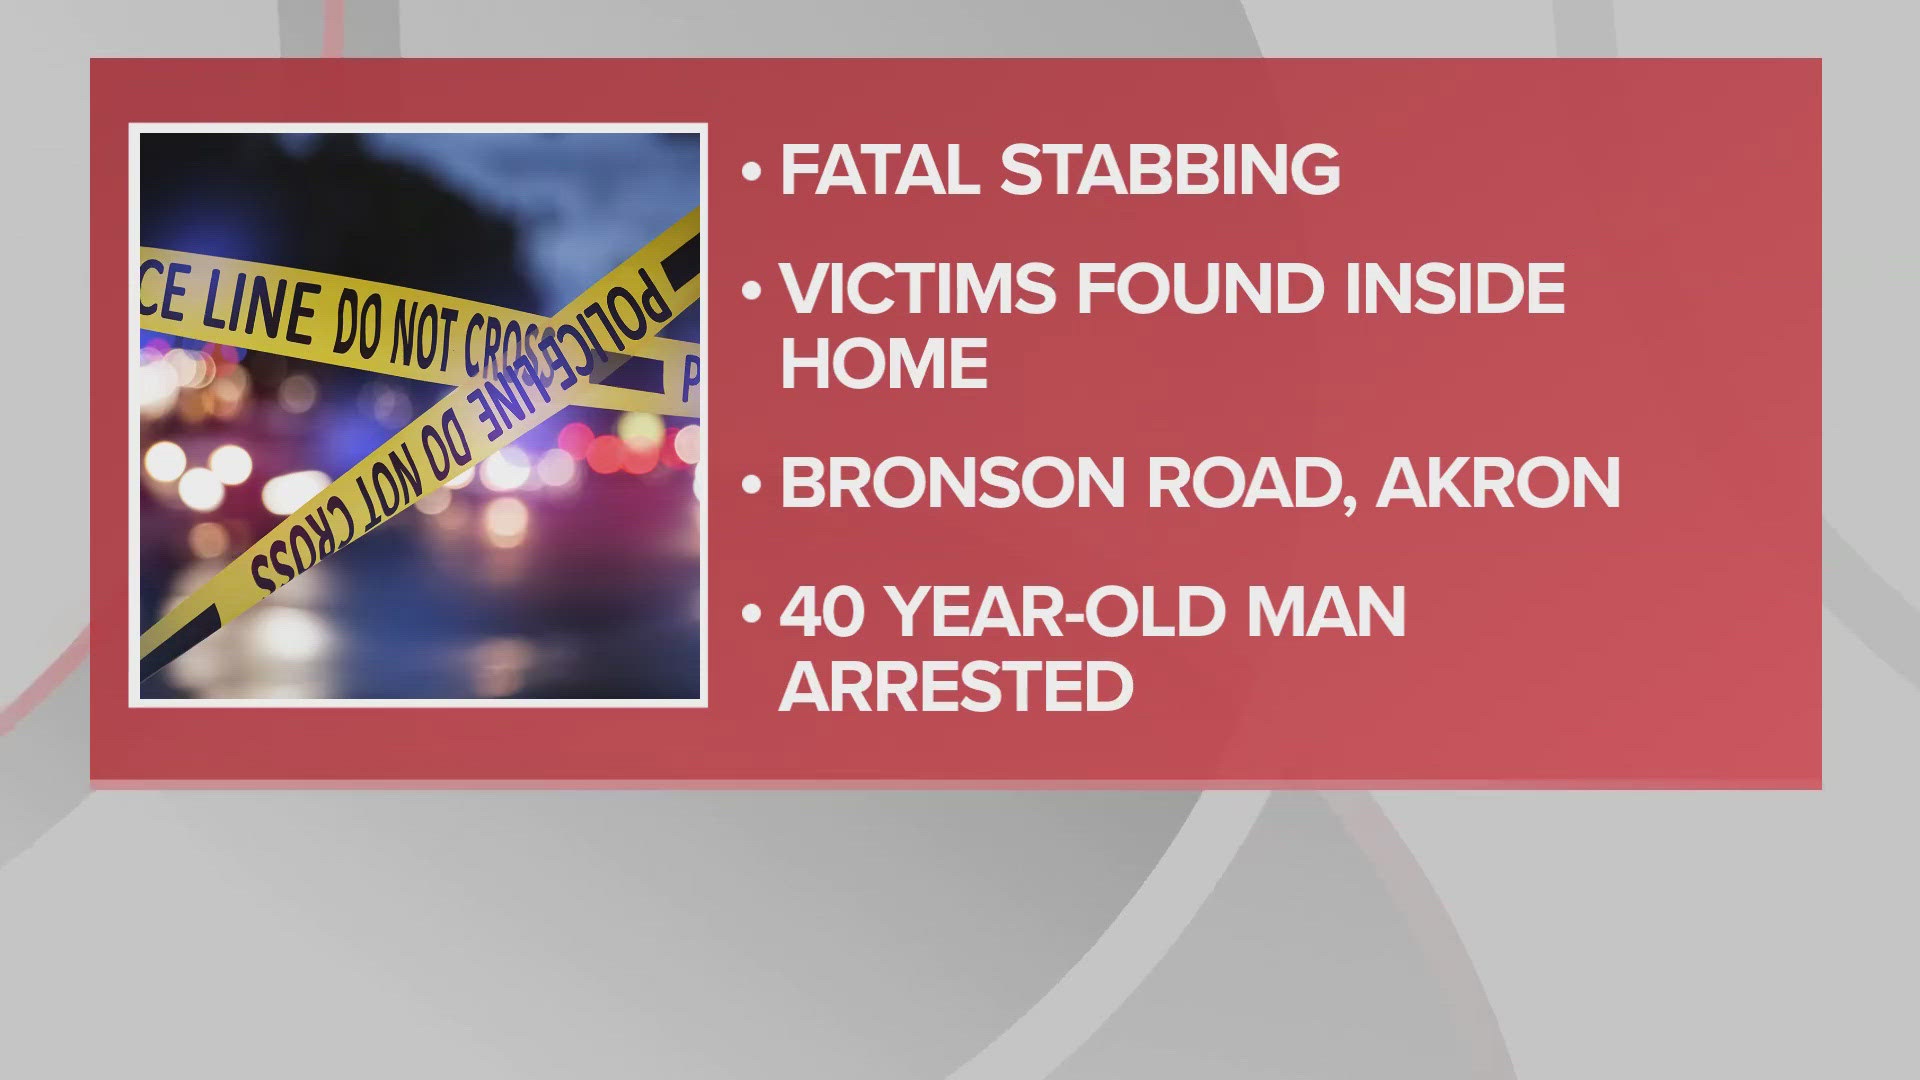 Police allege a man called 911 to report fatally stabbing his mother and critically injuring a 74-year-old man at a home on Bronson Road.